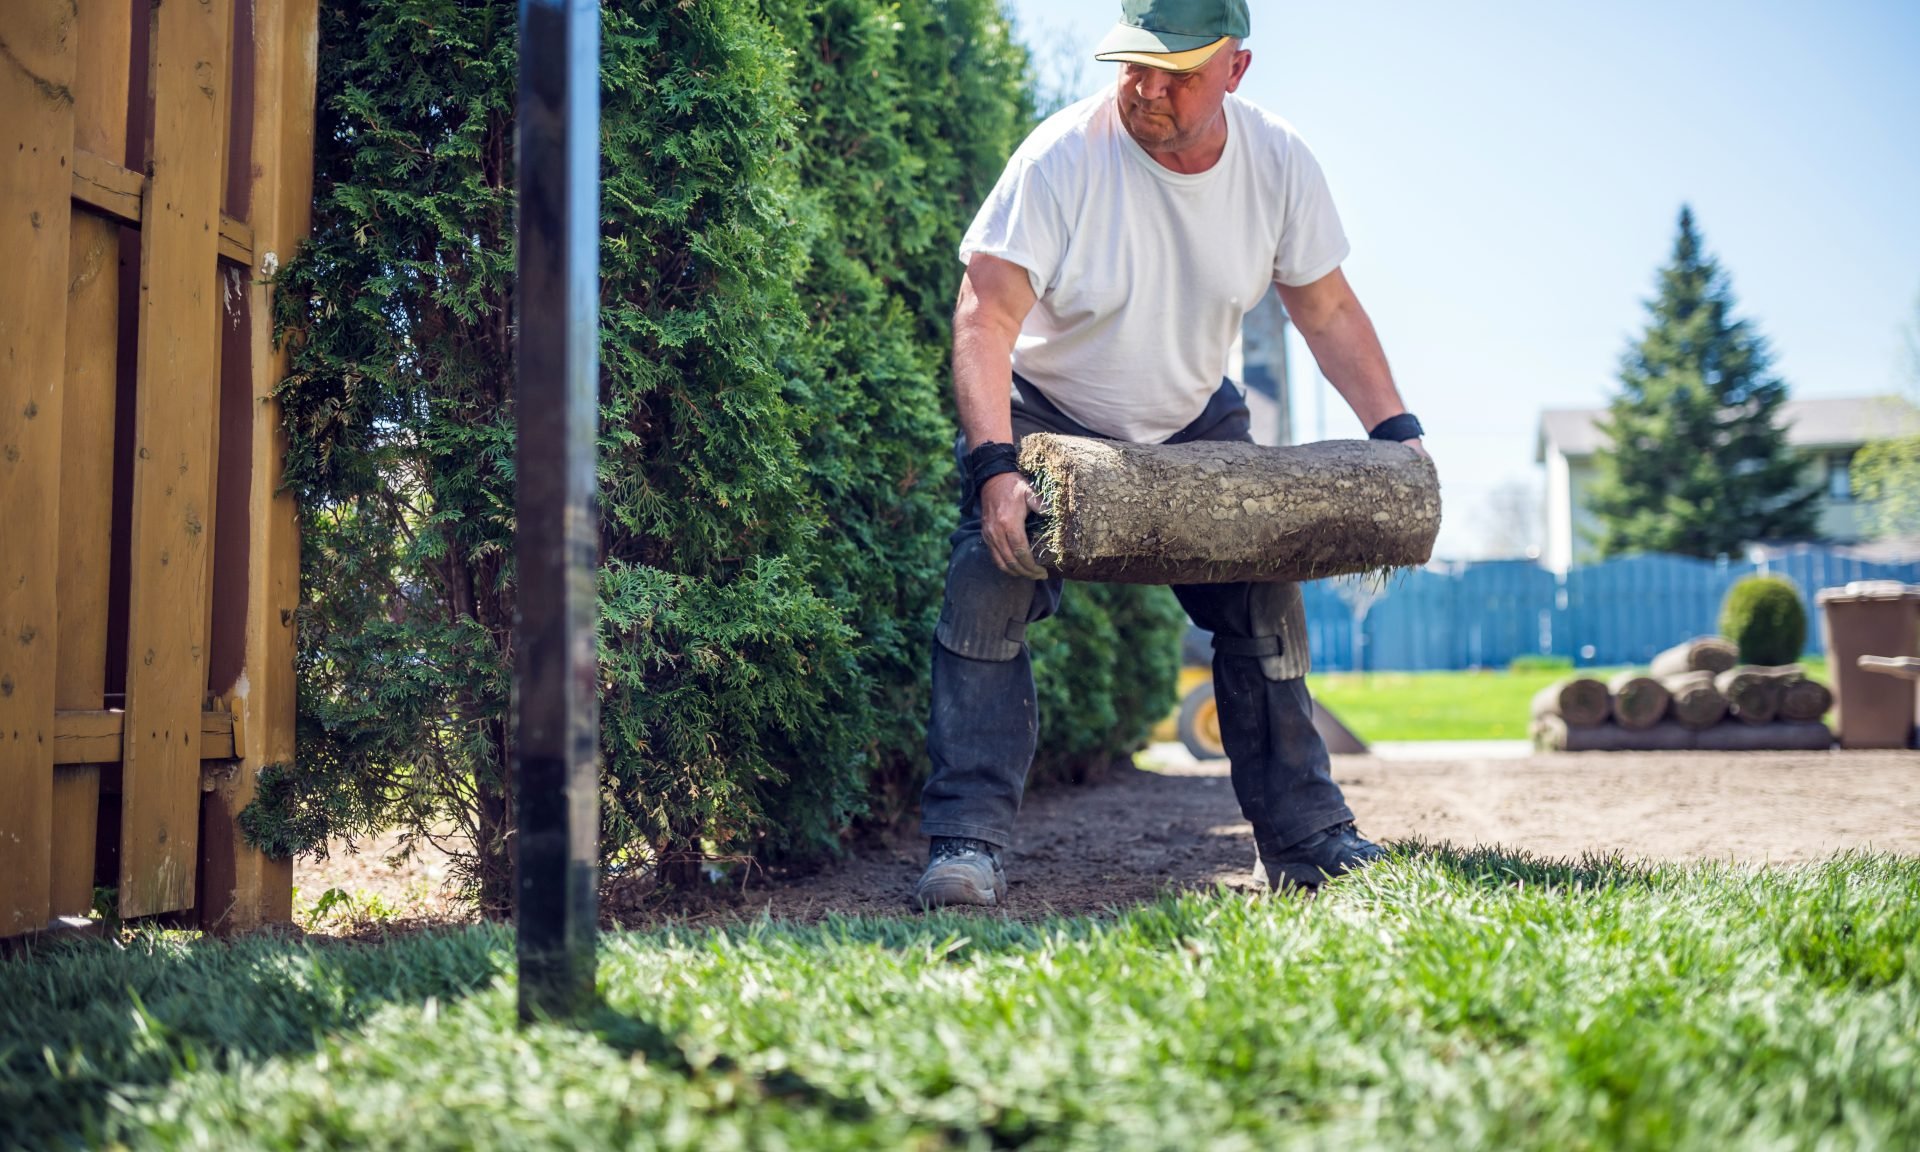 A Landscaping Or Lawn Care Business, How Much Does Landscaping Business Insurance Cost